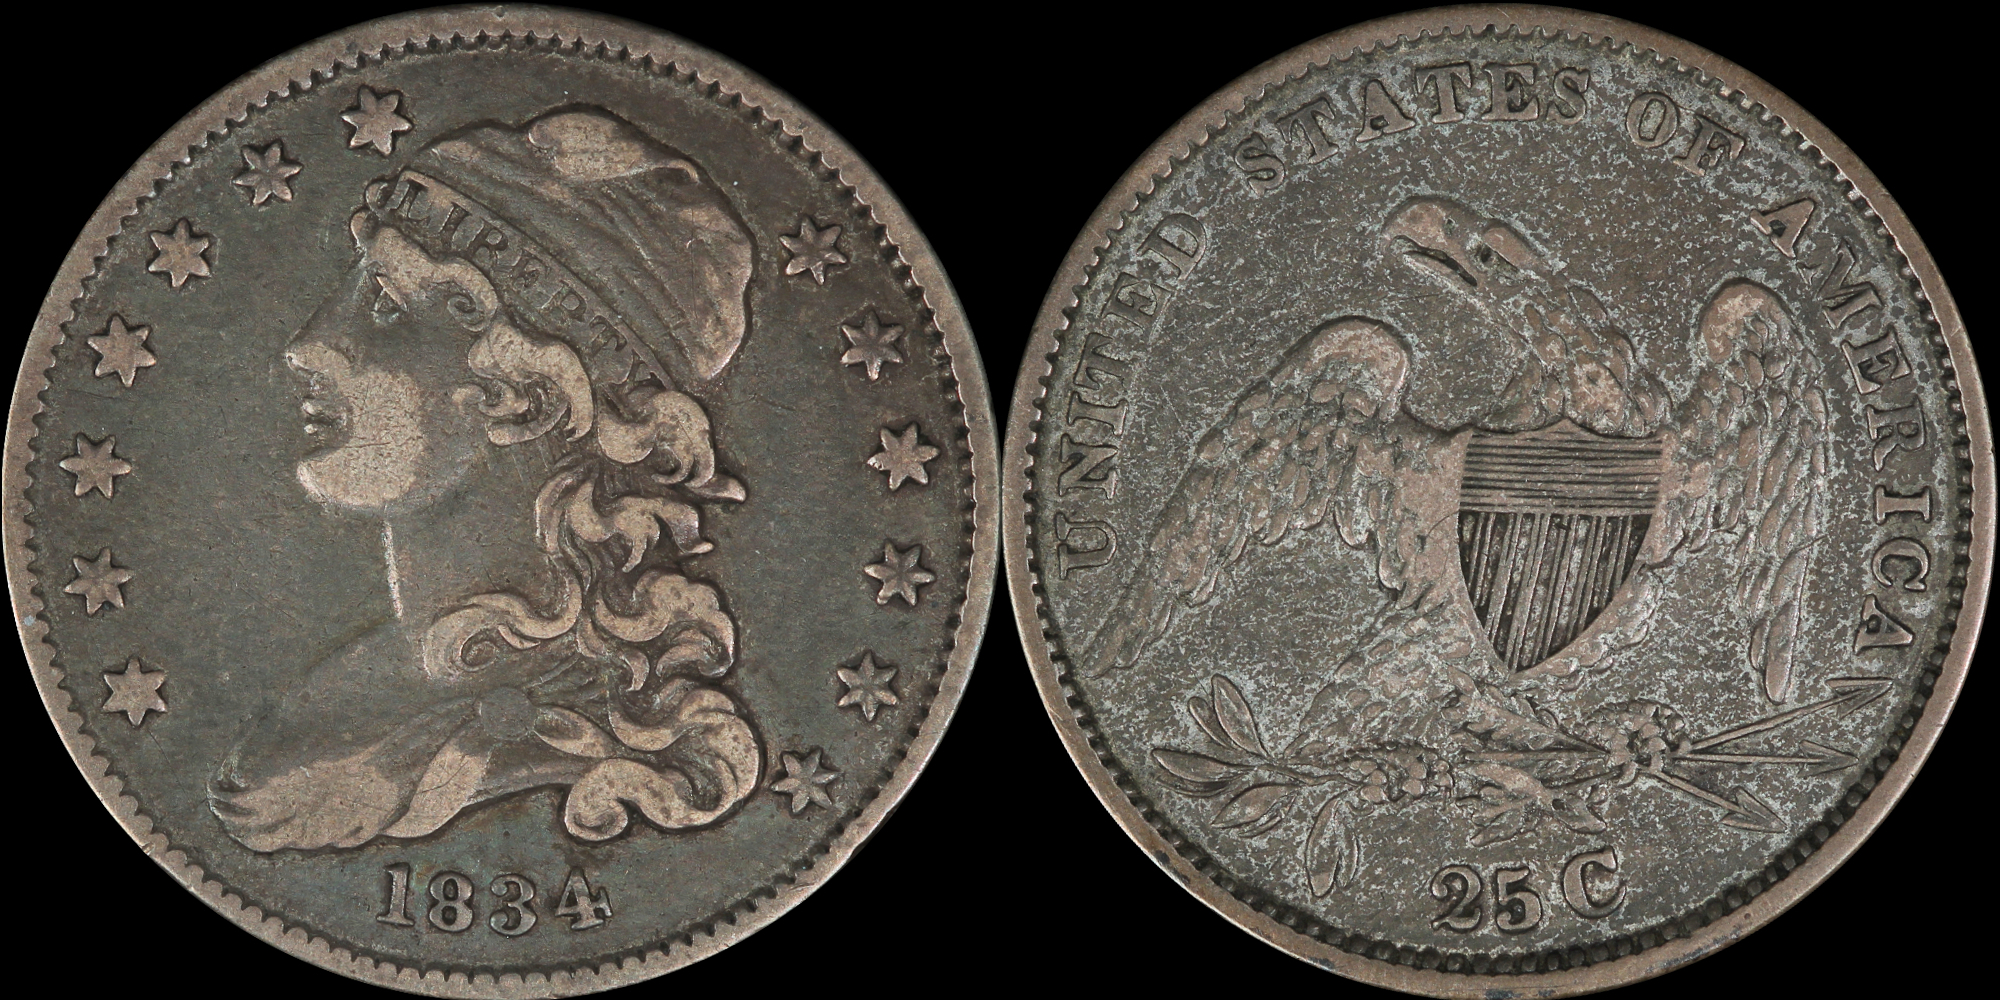 1834-25c-OoverF